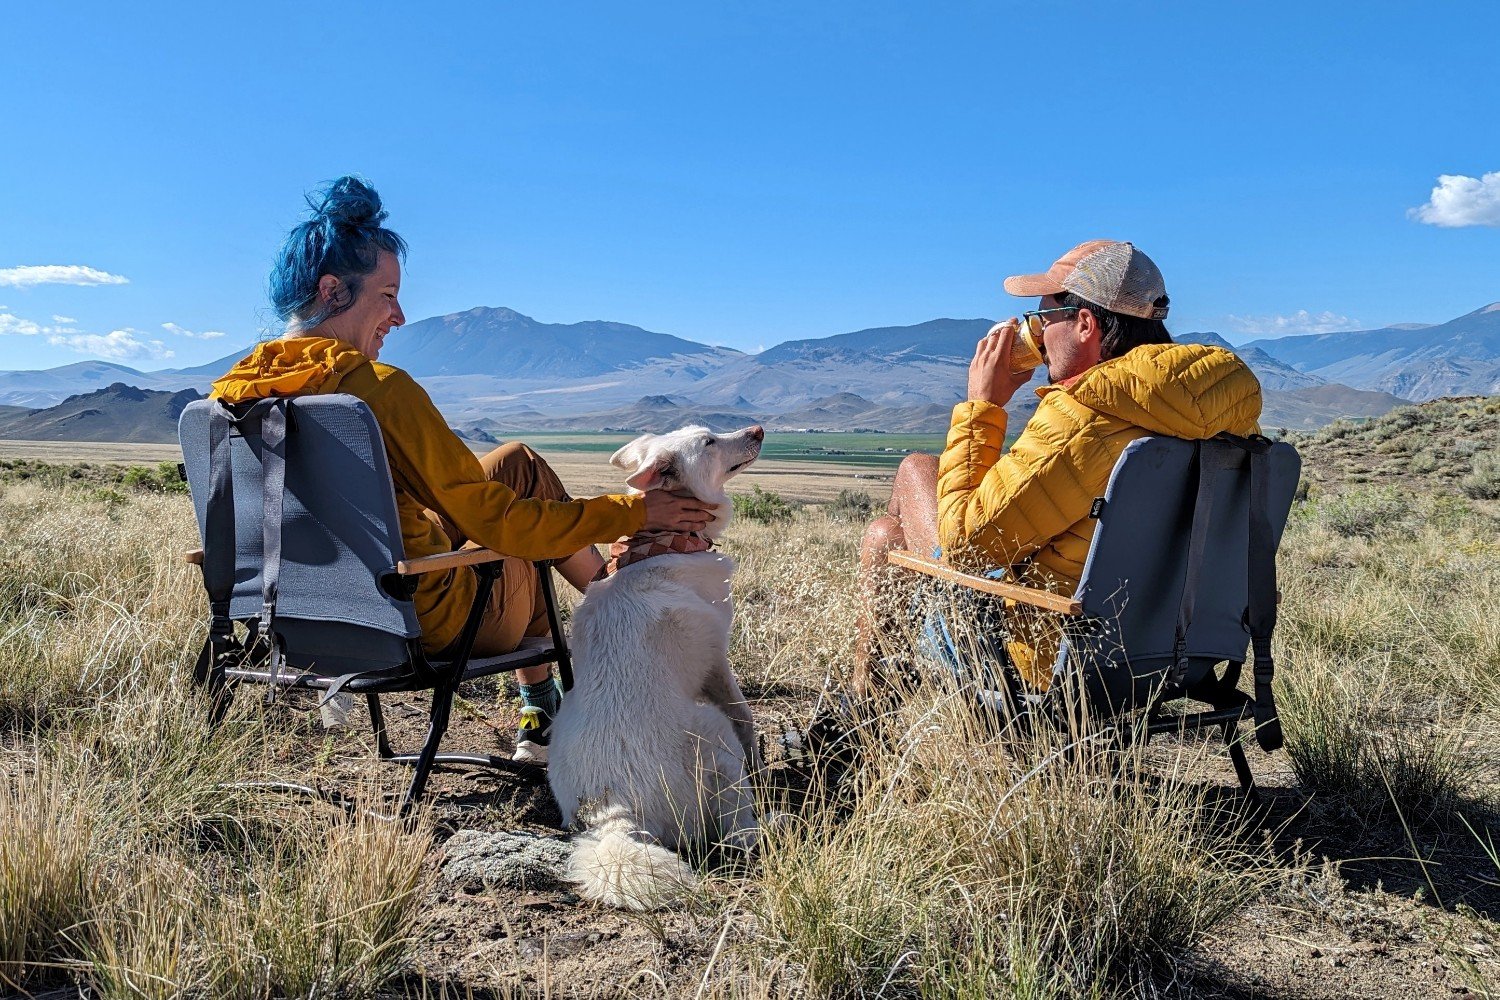 Two people sitting in the REI Outward Padded Low Chairs with their dog next to them in a beautiful desert scene